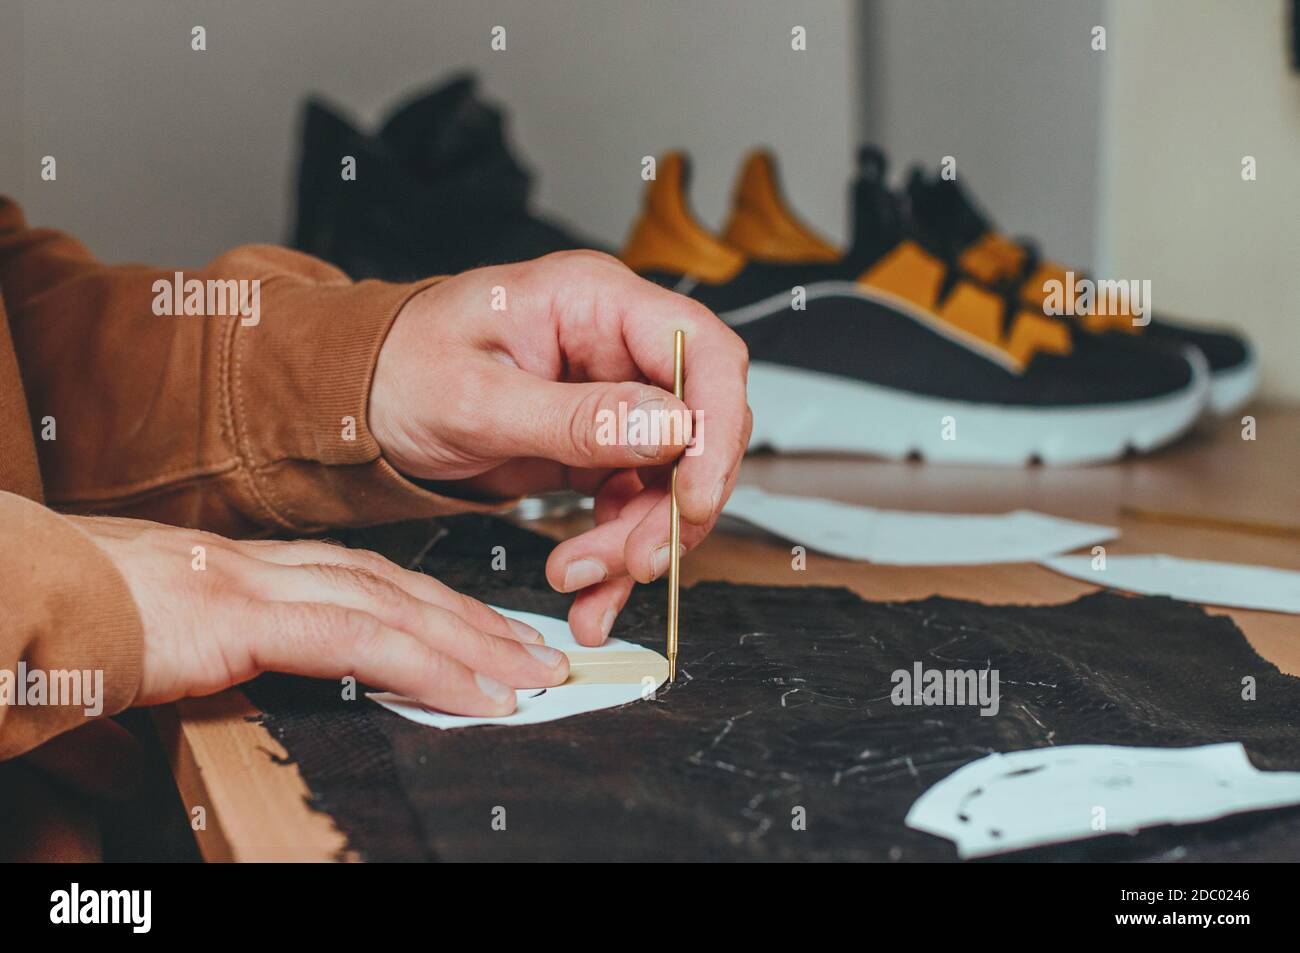 Shoemakers hands making patterns from leather in his workshop Stock Photo